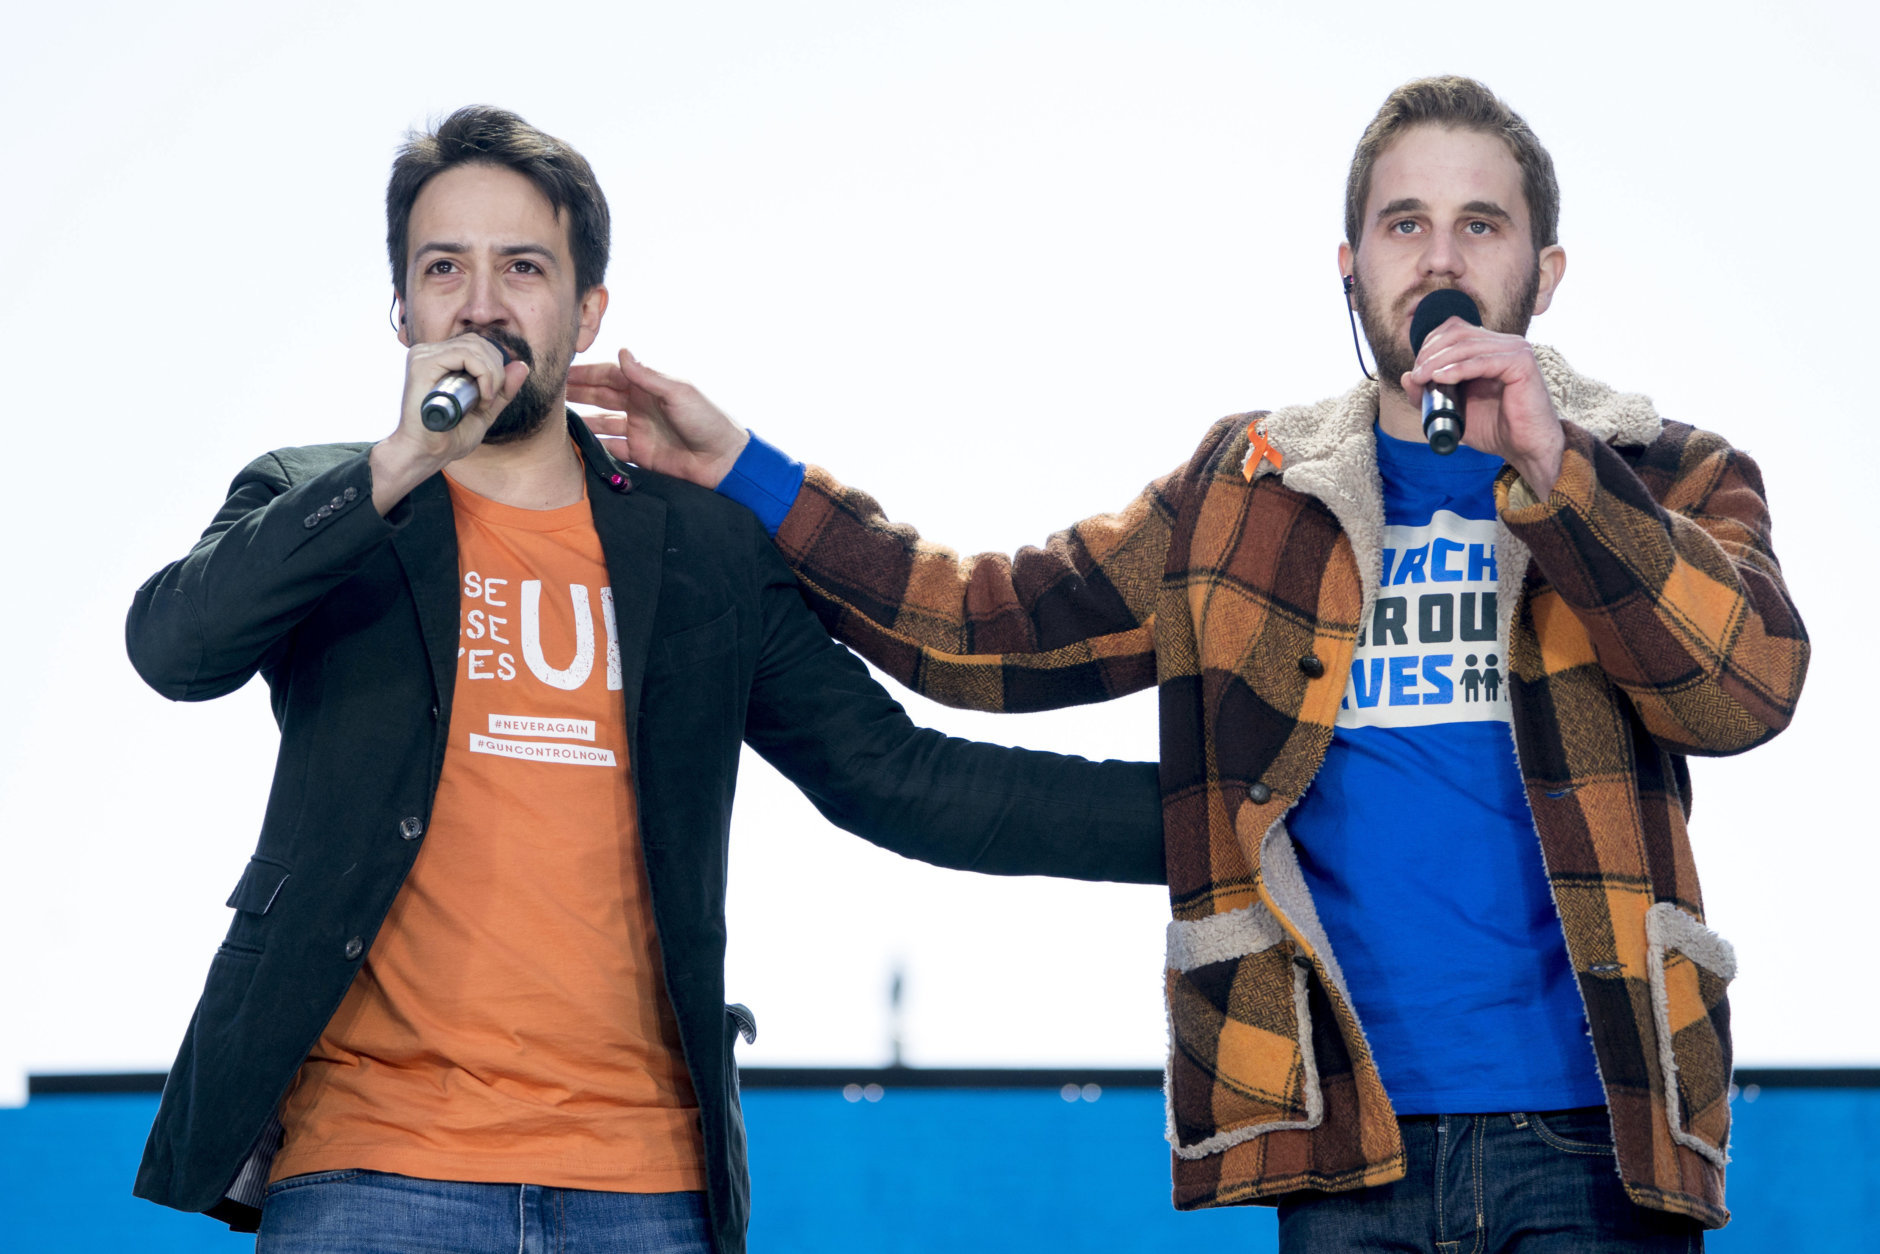 Lin-Manuel Miranda and Ben Platt perform "Found Tonight" during the "March for Our Lives" rally in support of gun control in Washington, Saturday, March 24, 2018. (AP Photo/Andrew Harnik)